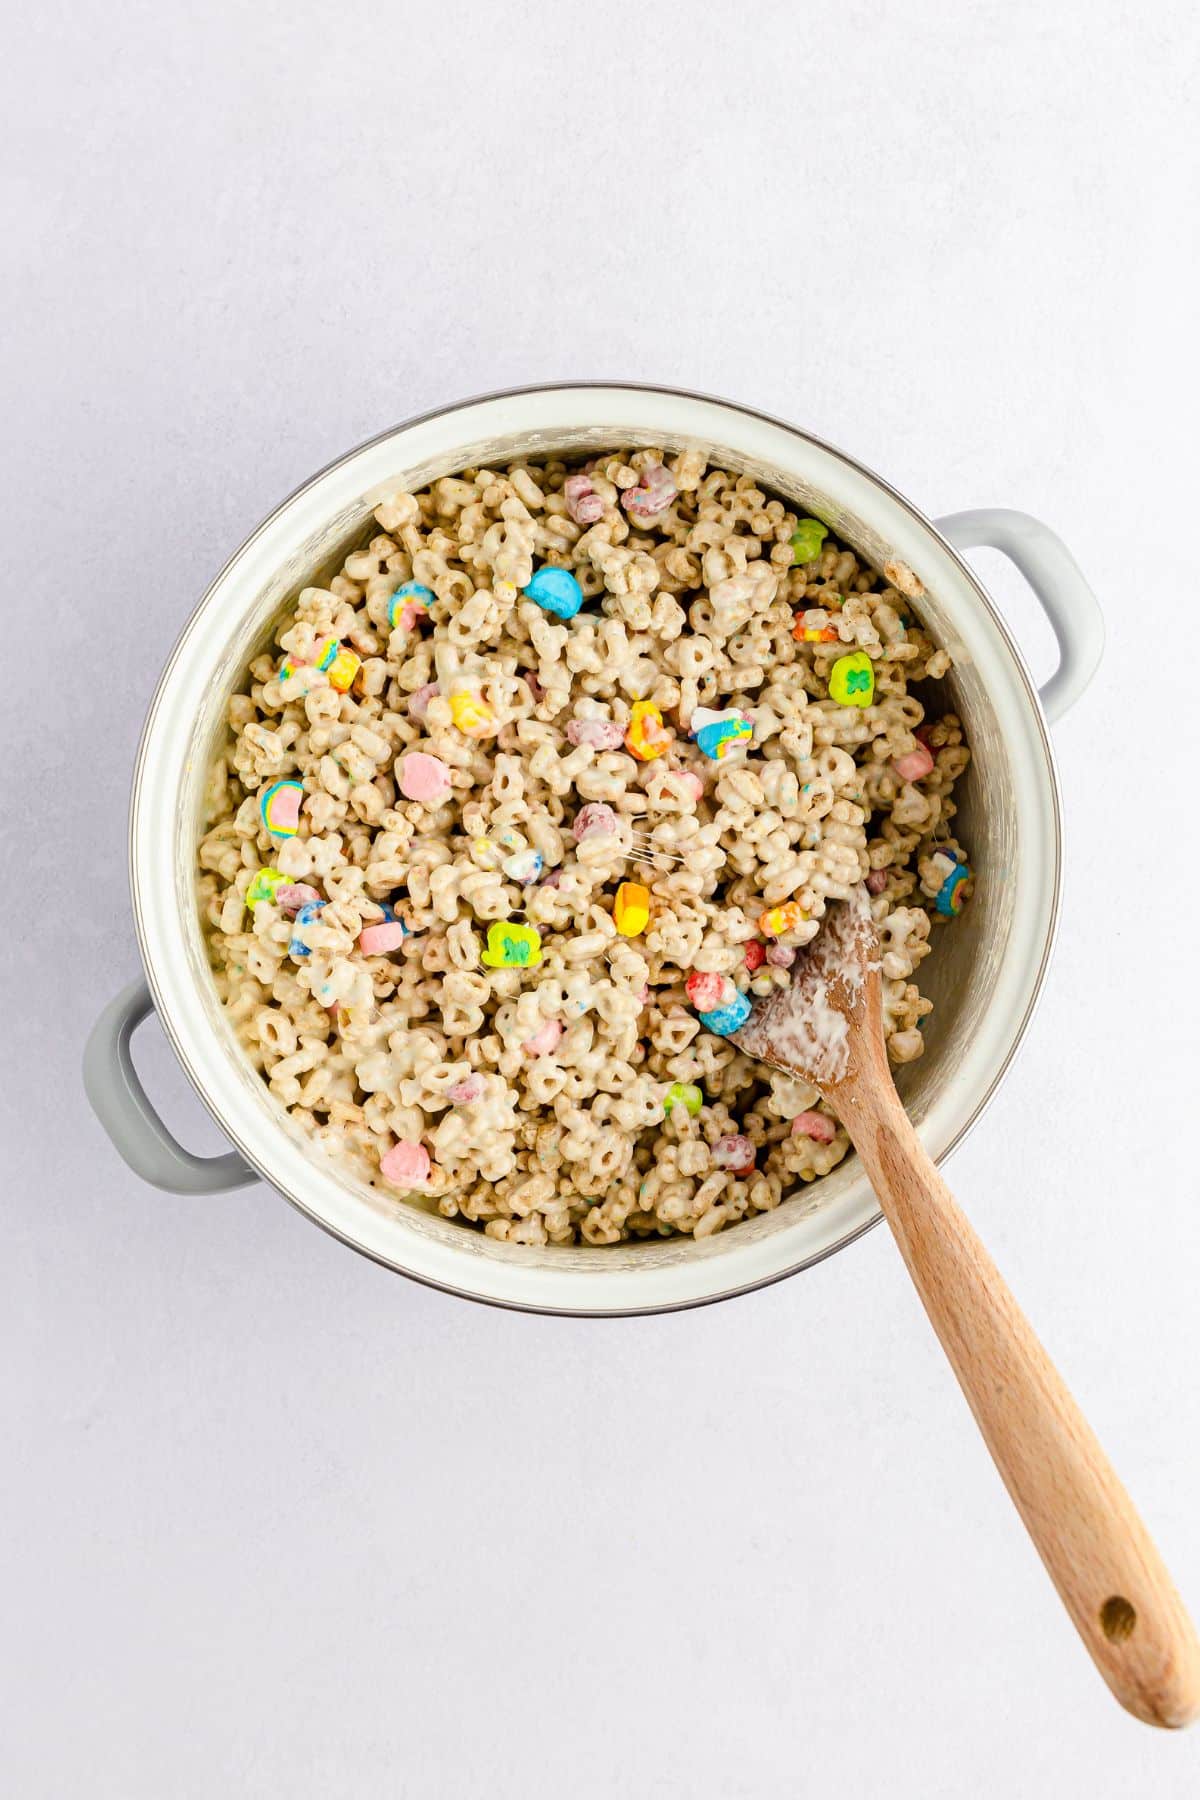 Lucky Charms mixed in with marshmallow mixture and a wooden spoon